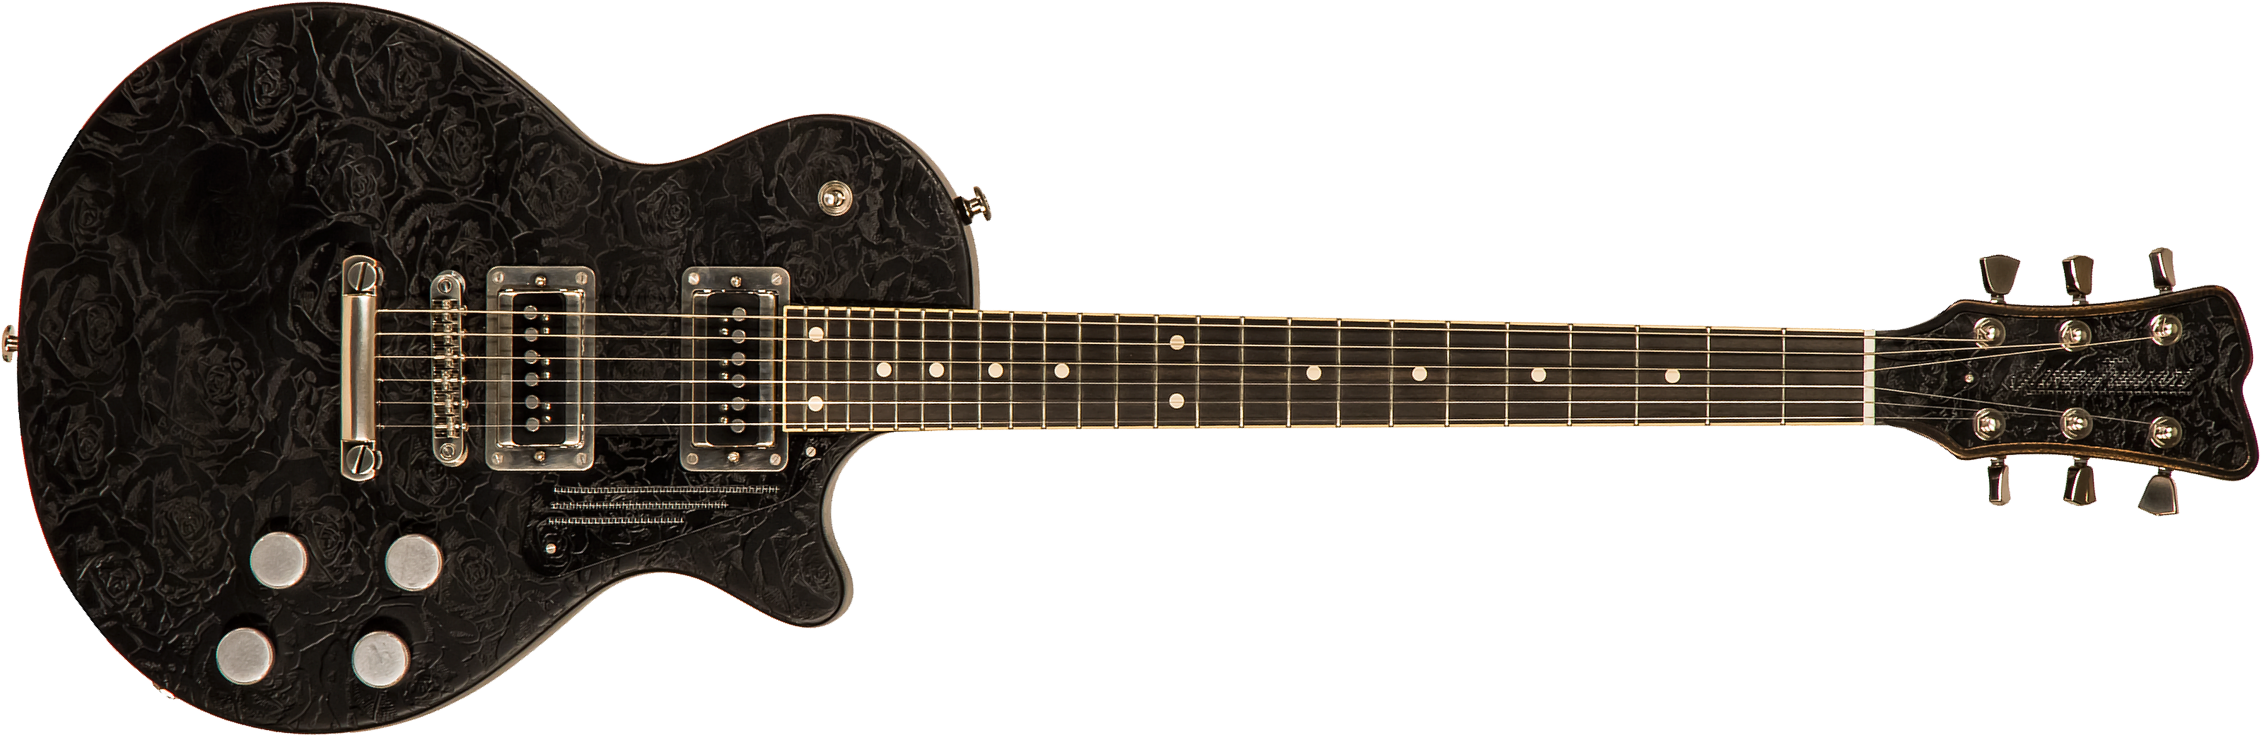 James Trussart Steeldeville Perf.back 2h Seymour Duncan Ht Rw #21008 - Black On Roses - Single cut electric guitar - Main picture